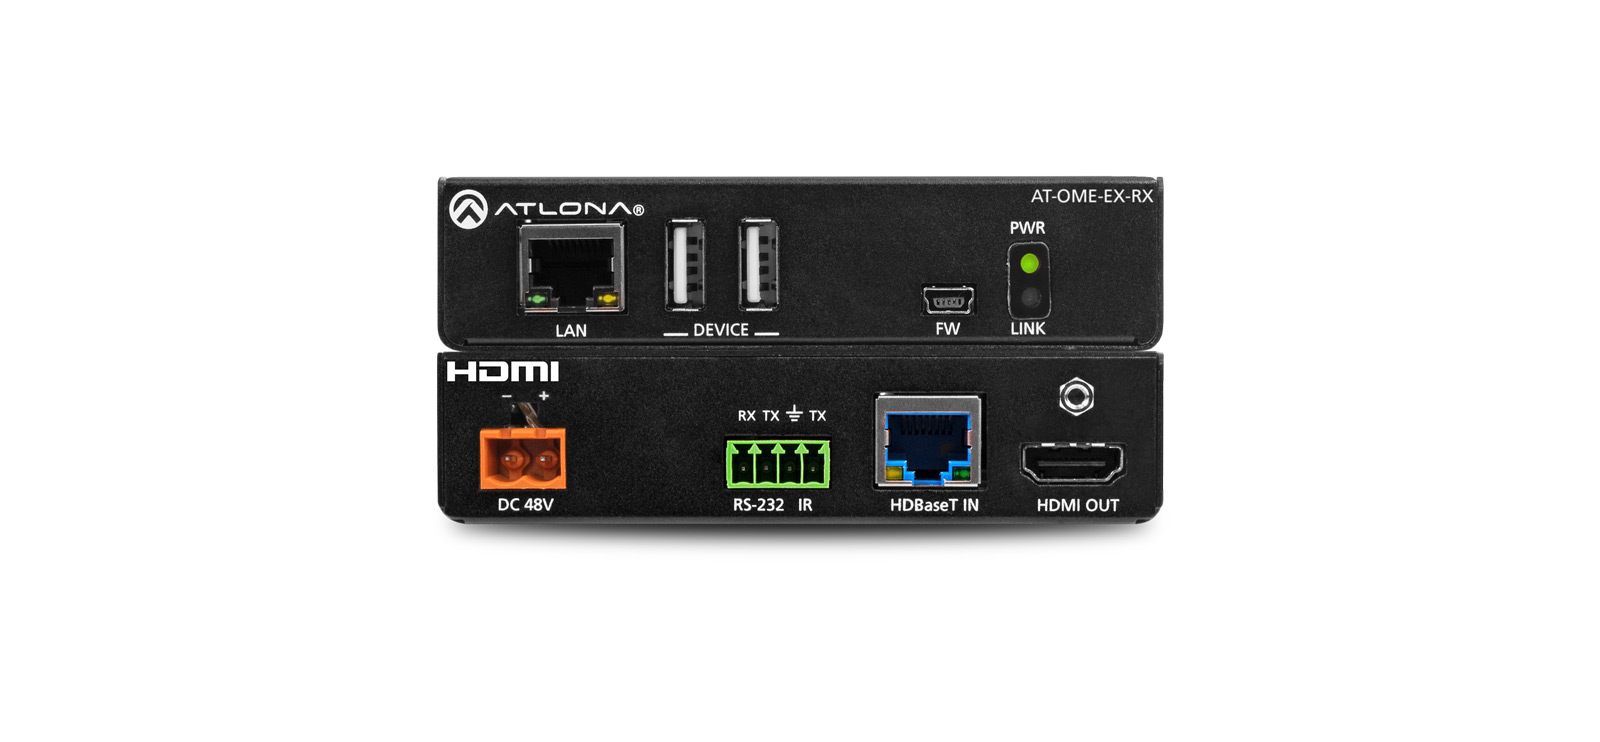 OME-PS62 4K/UHD 6x2 Matrix Switcher for HDMI, USB-C, and HDBaseT